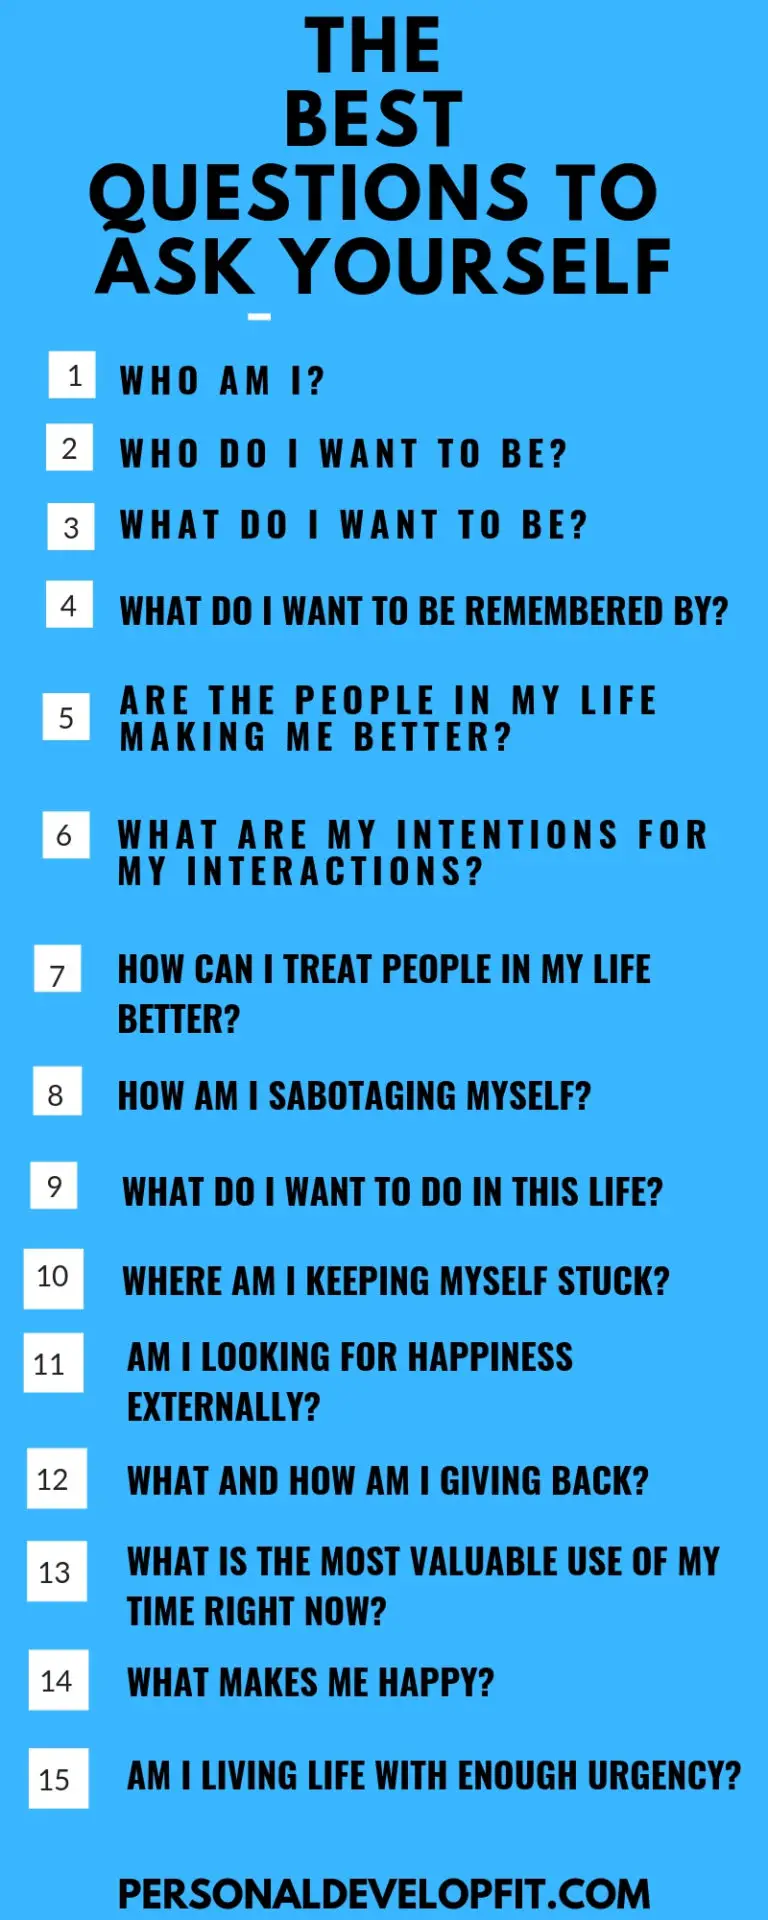 75-questions-to-ask-yourself-for-massive-personal-growth